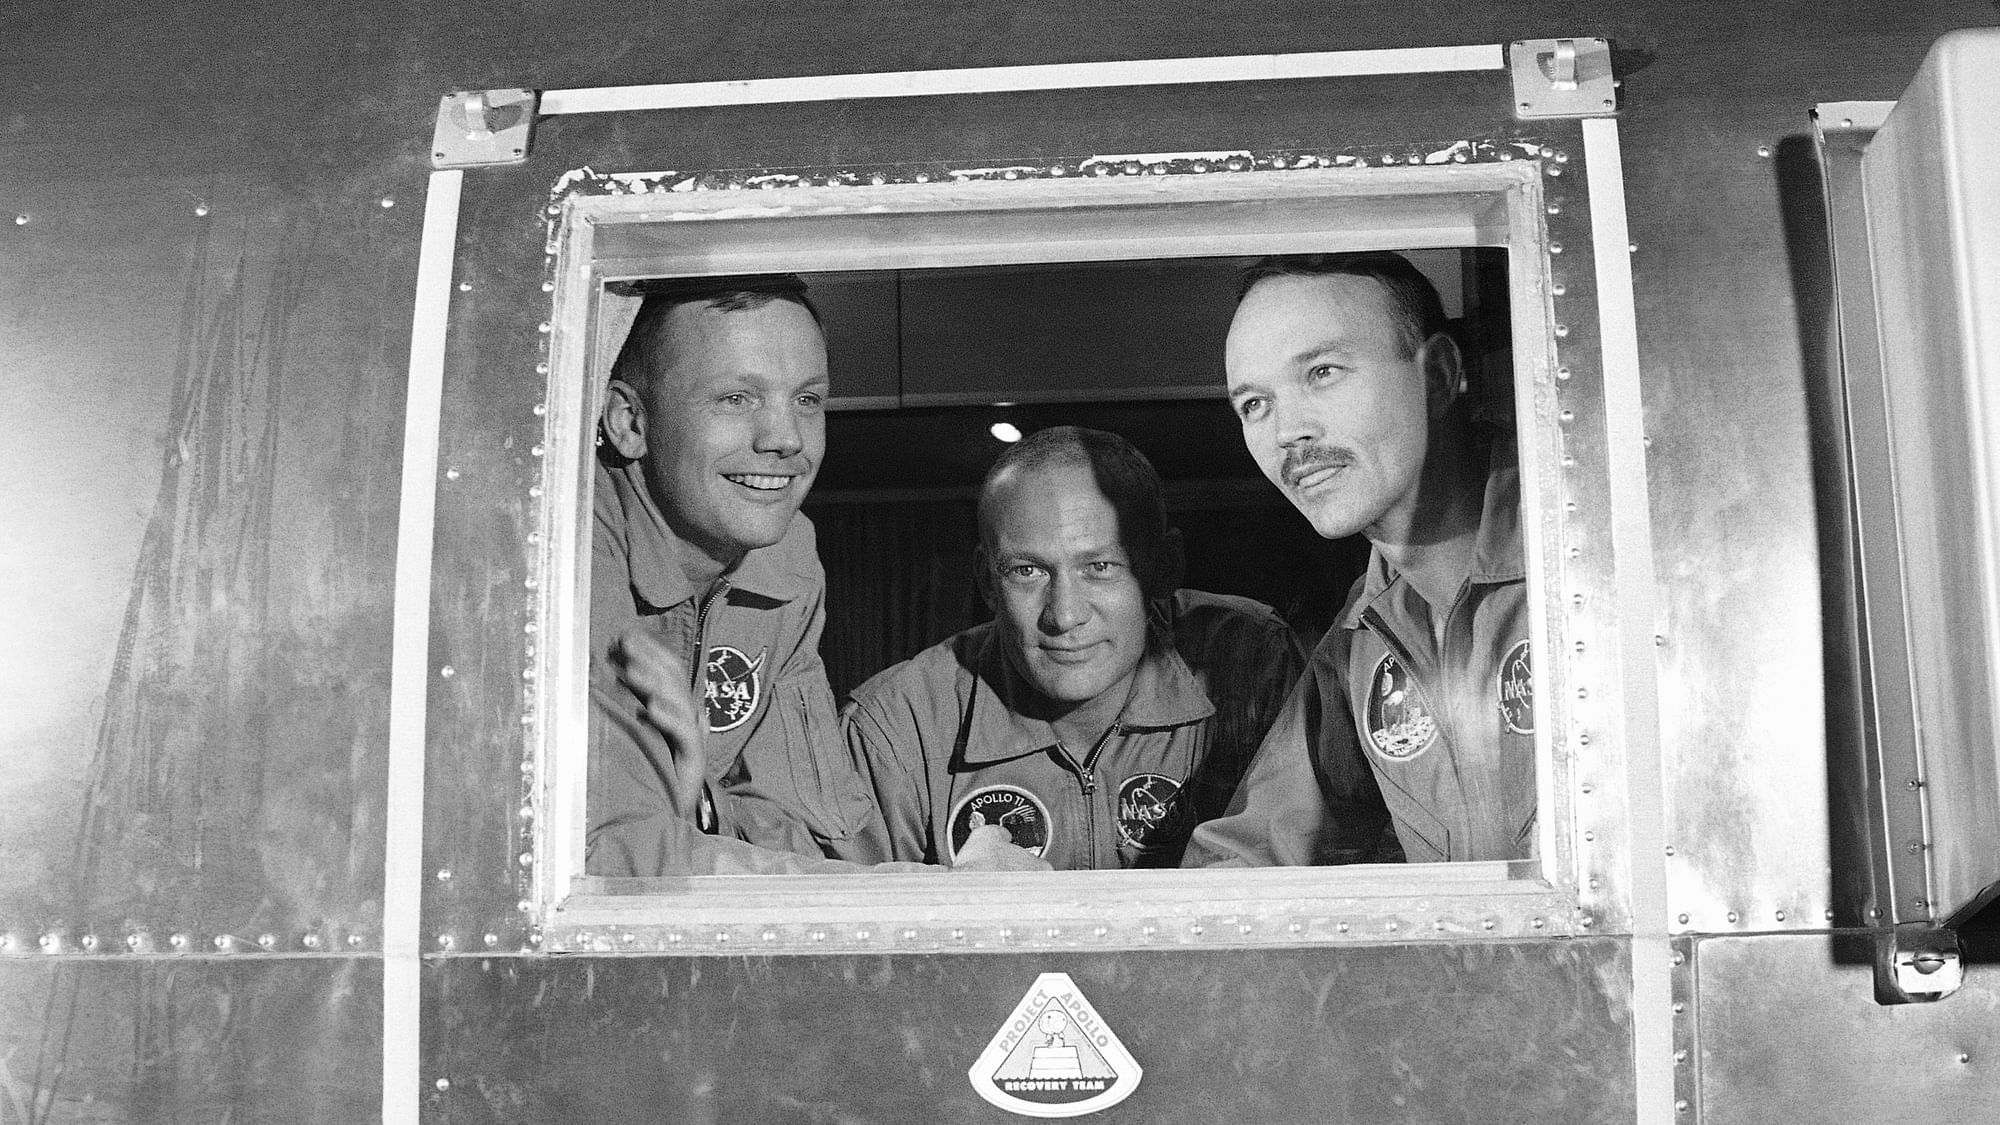  In this 27 July 1969 file photo, Apollo 11 crew members, from left, Neil Armstrong, Buzz Aldrin and Michael Collins sit inside a quarantine van in Houston.